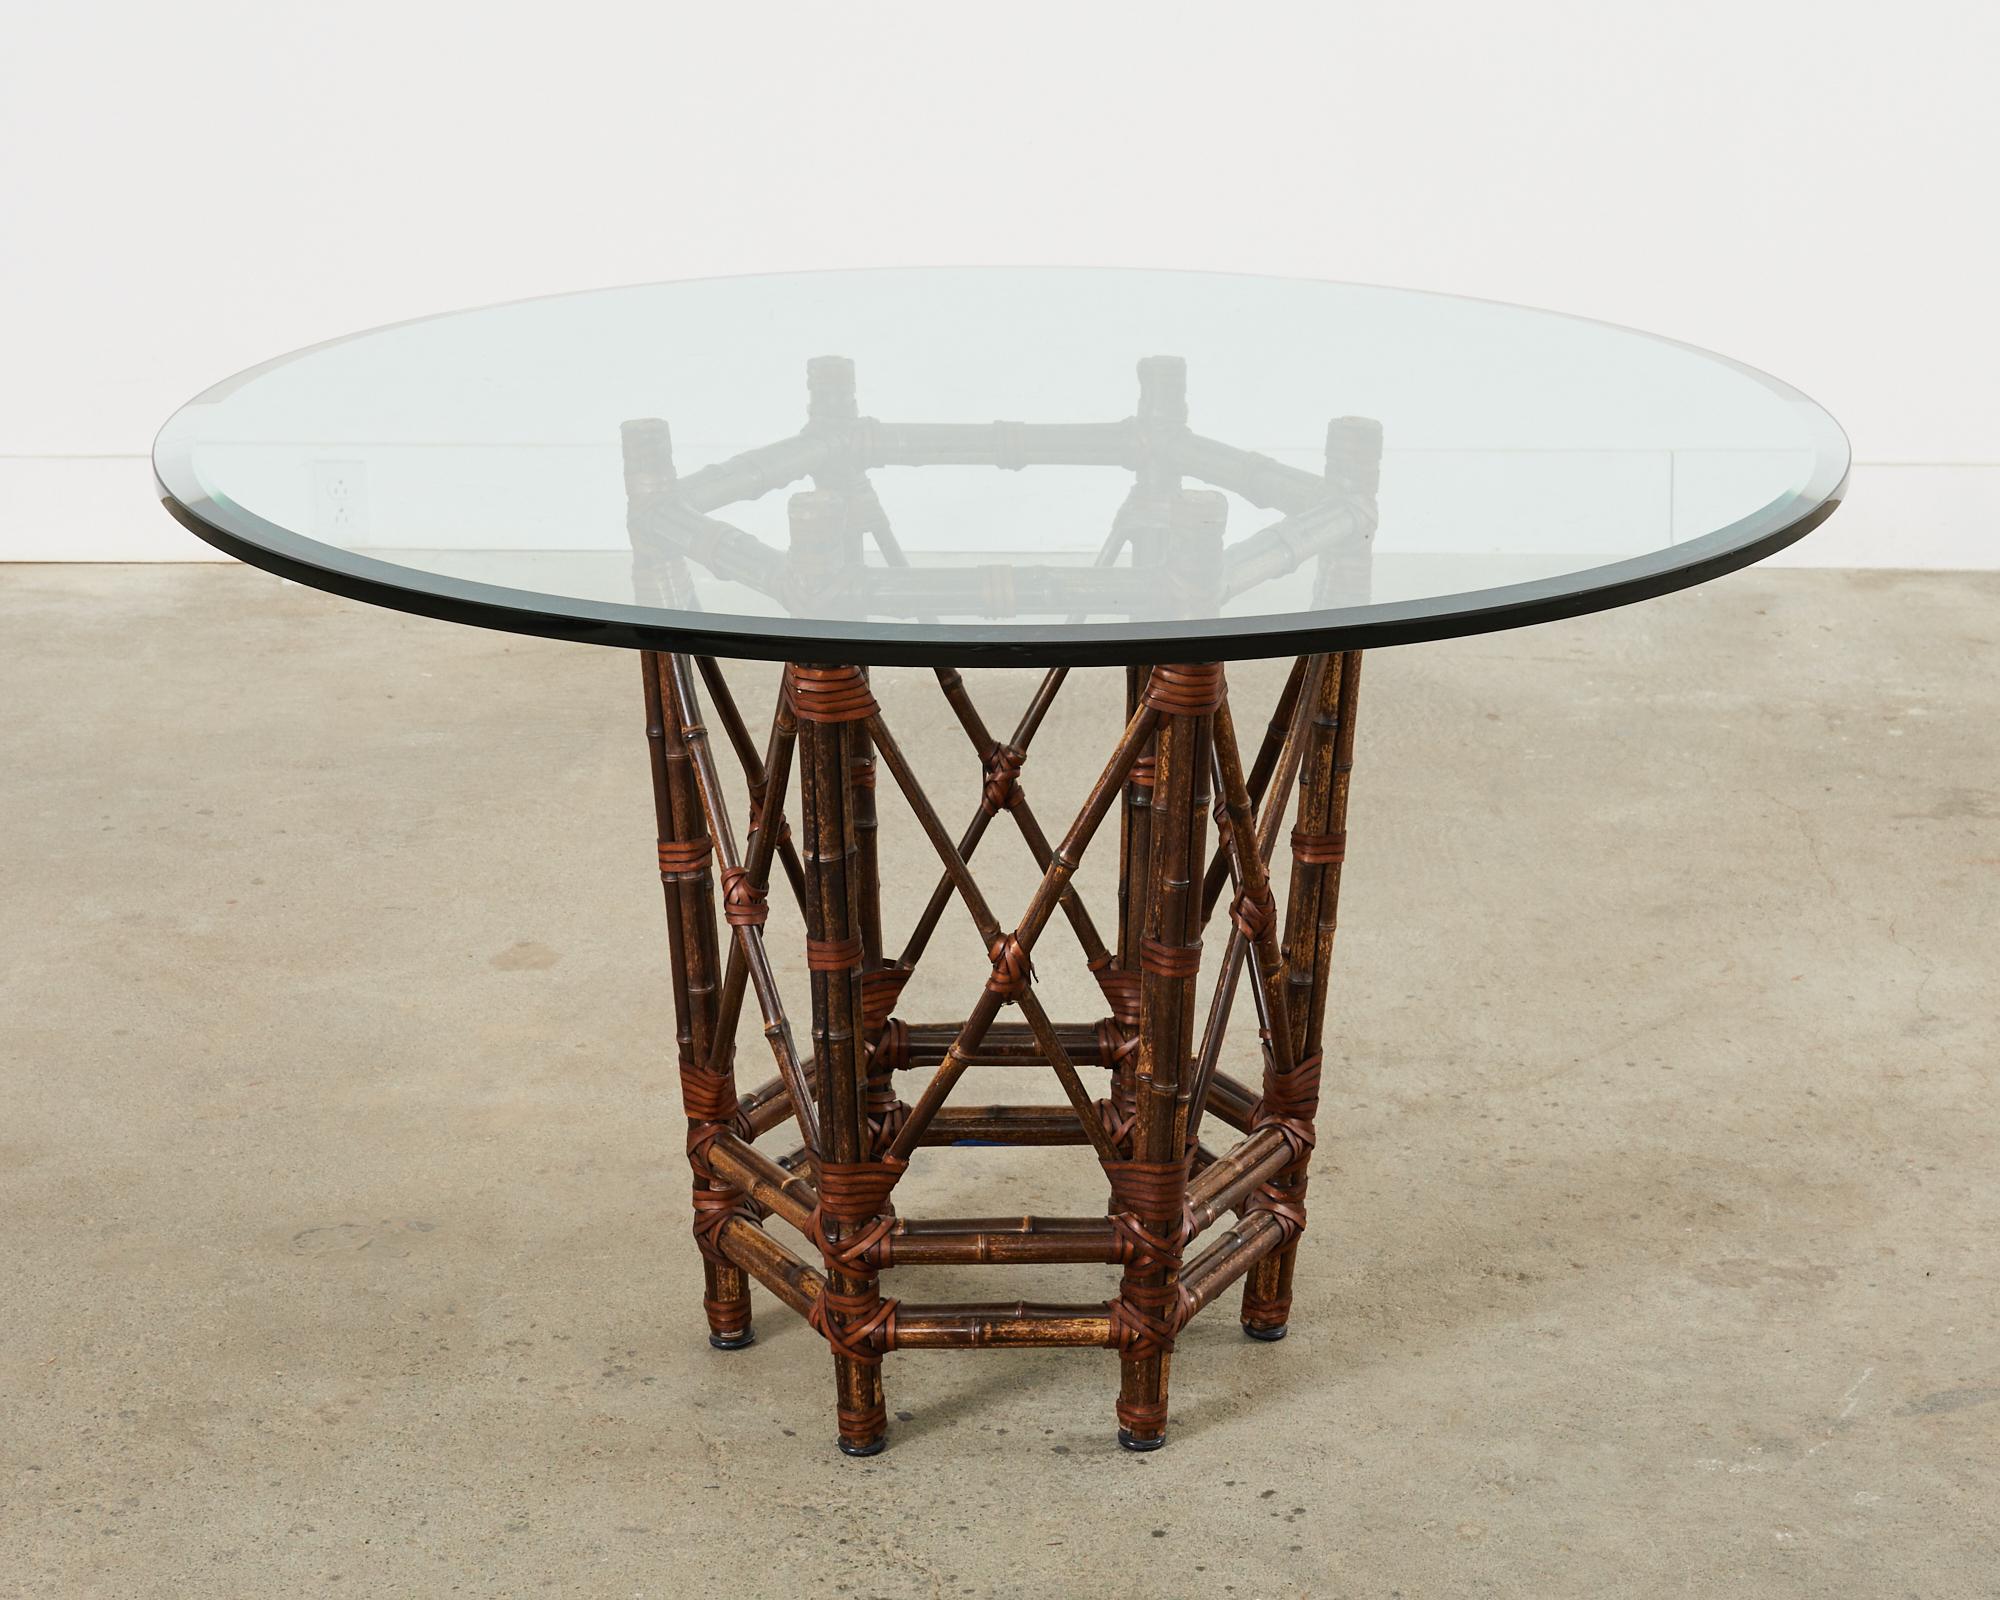 mcguire table